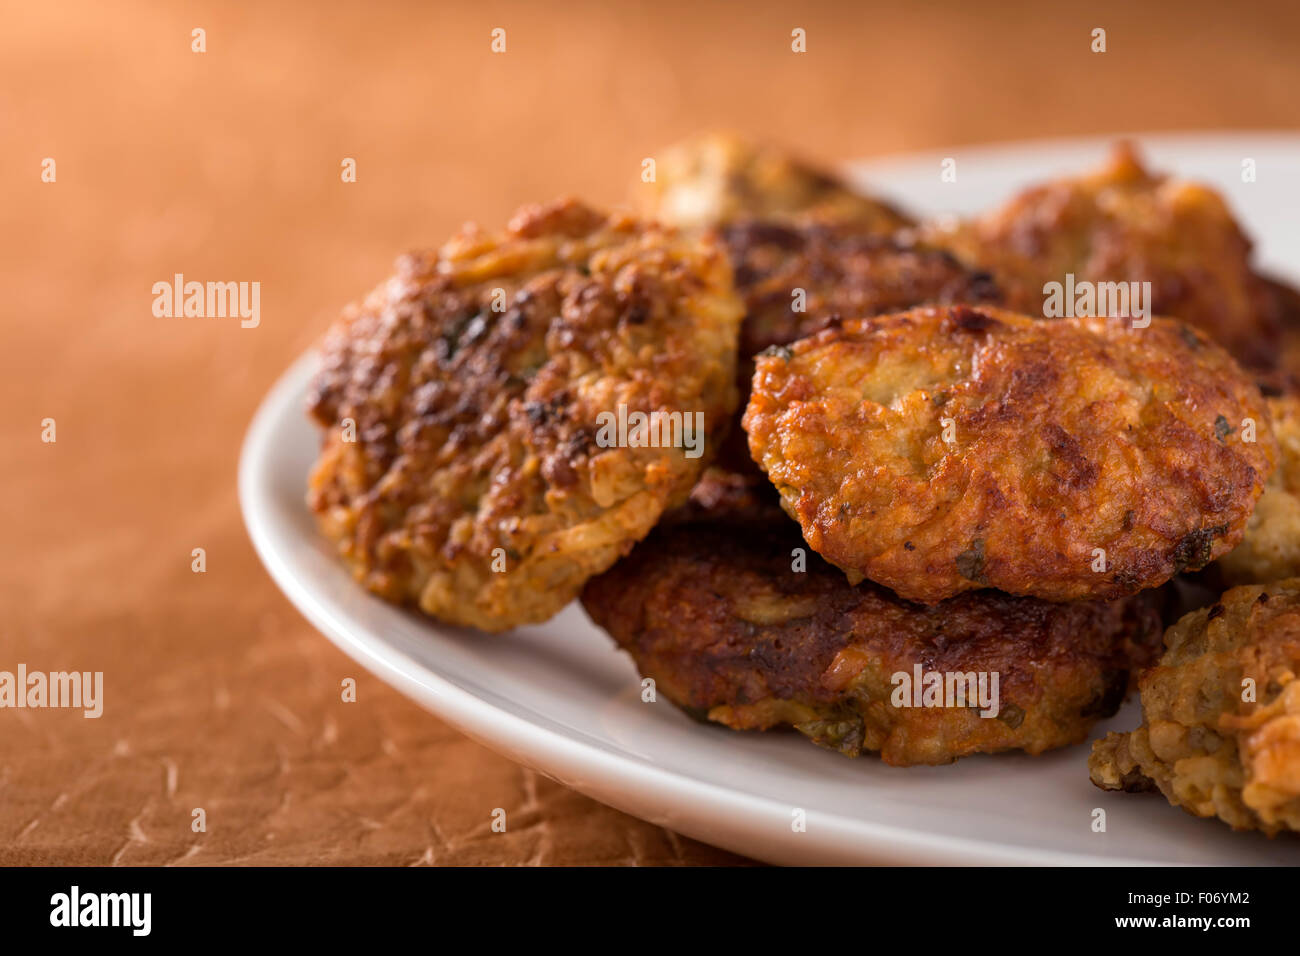 Roasted meatball on a white plate with brown background Stock Photo